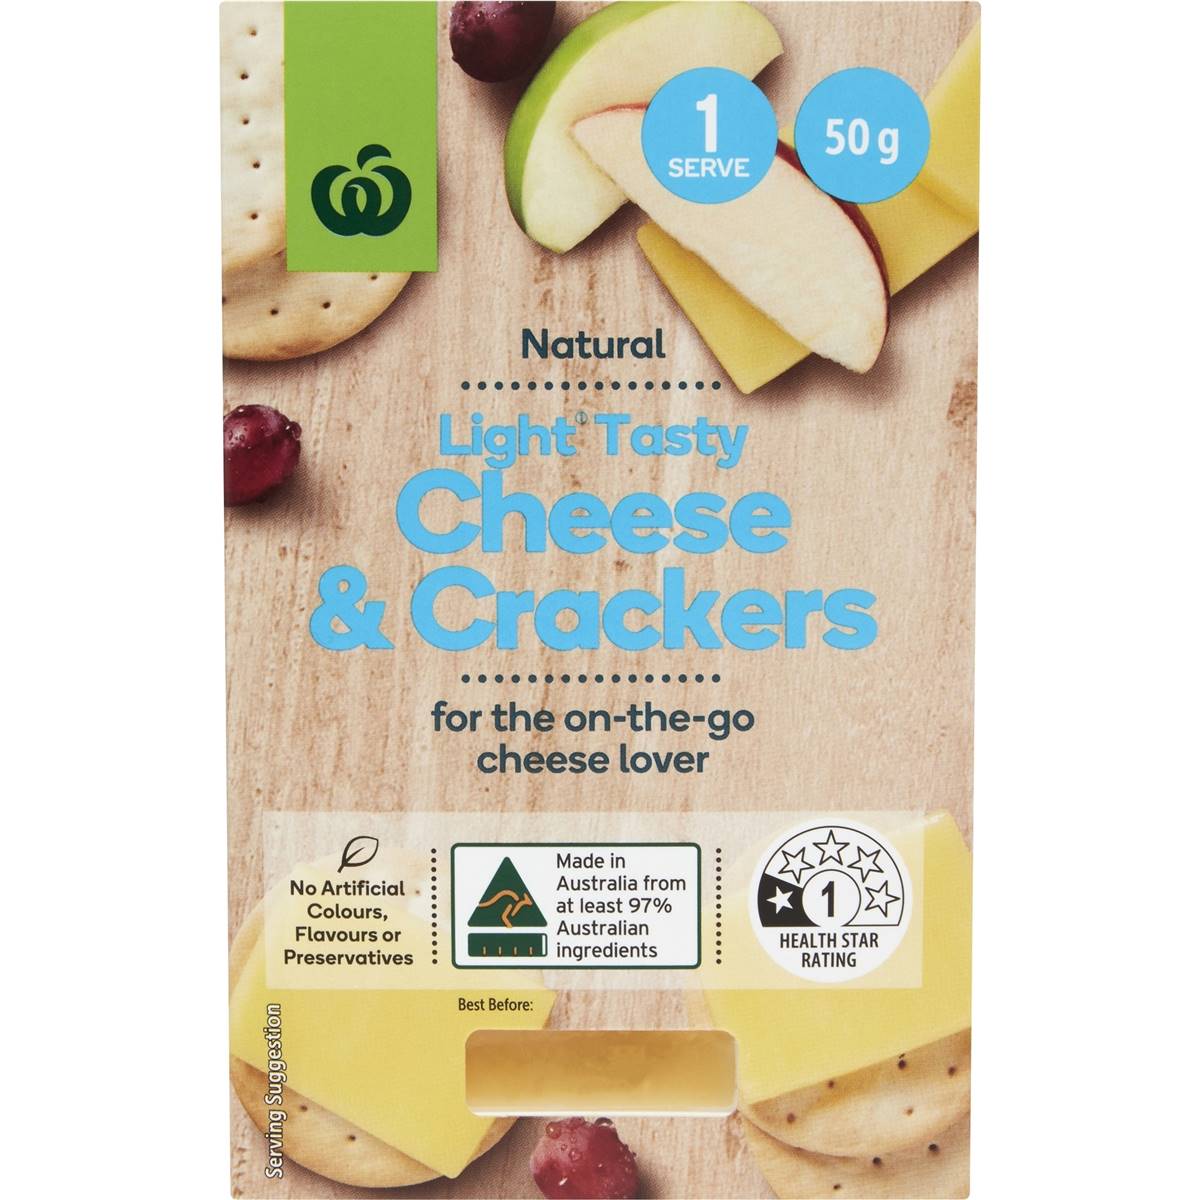 Calories in Woolworths Cheese & Crackers Light Tasty